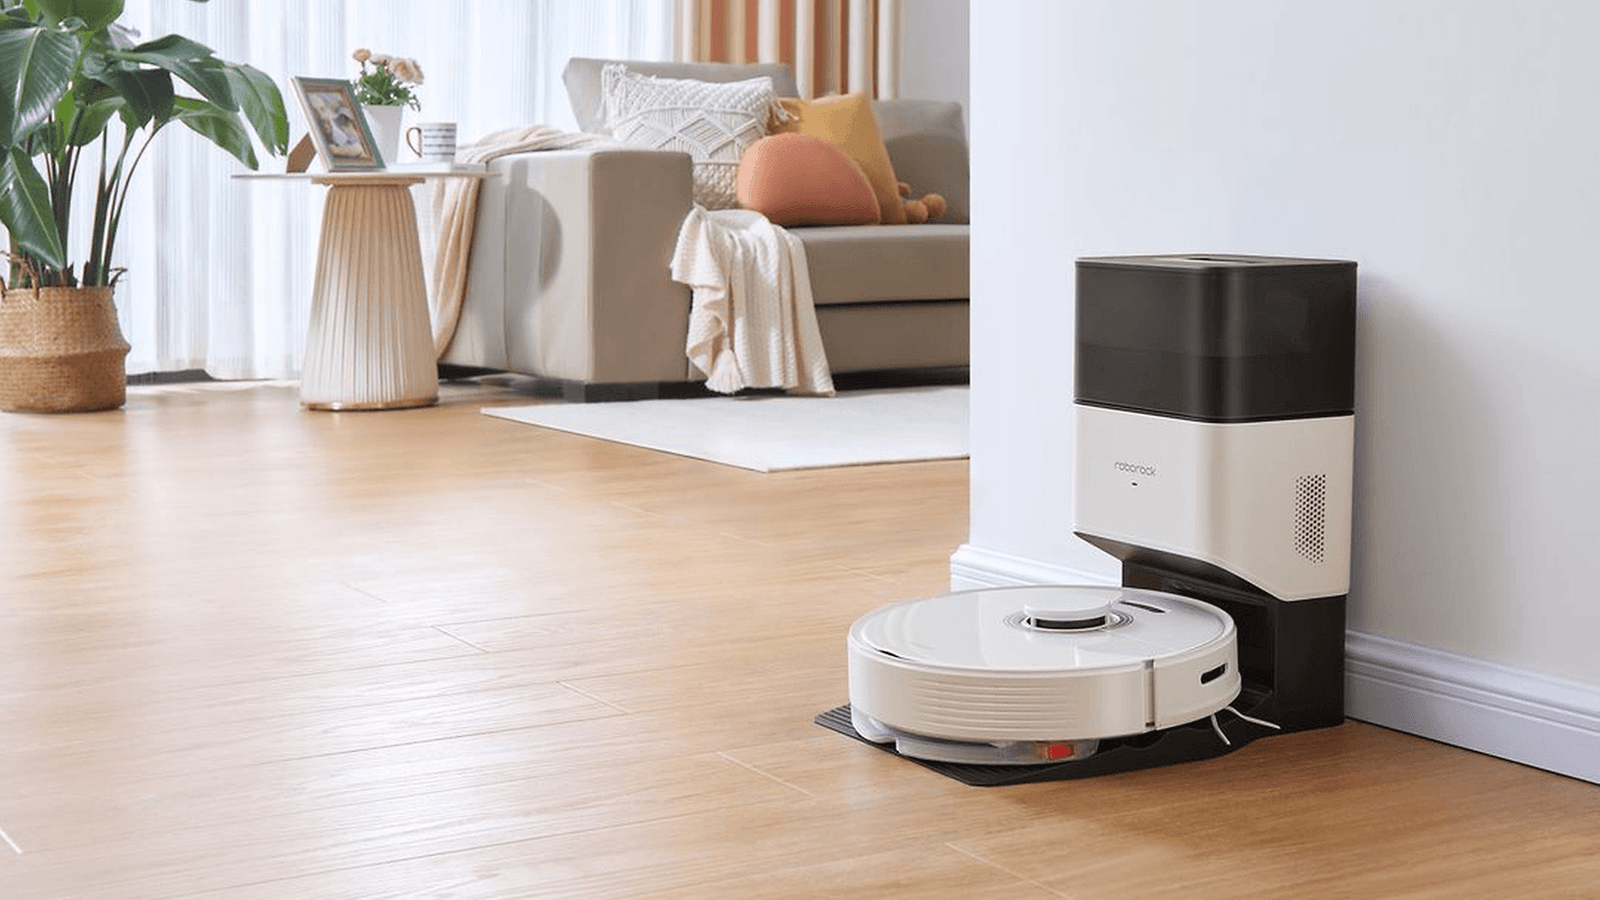 Roborock launching two affordable robot vacuums in October